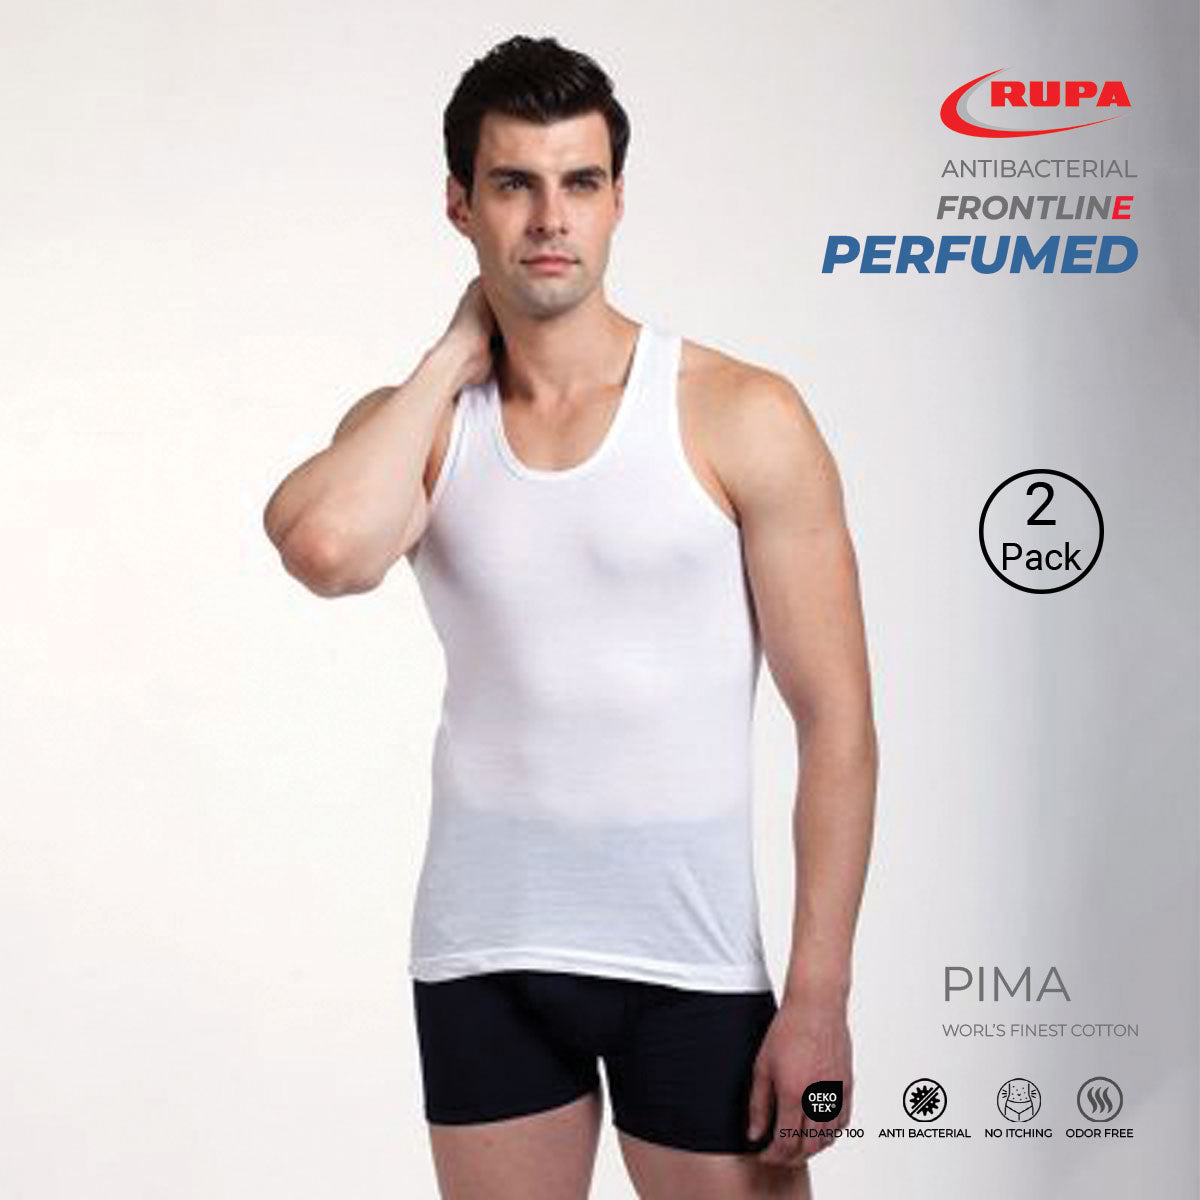 Rupa Knitwear - Want to be Sweat Free & Comfortable while